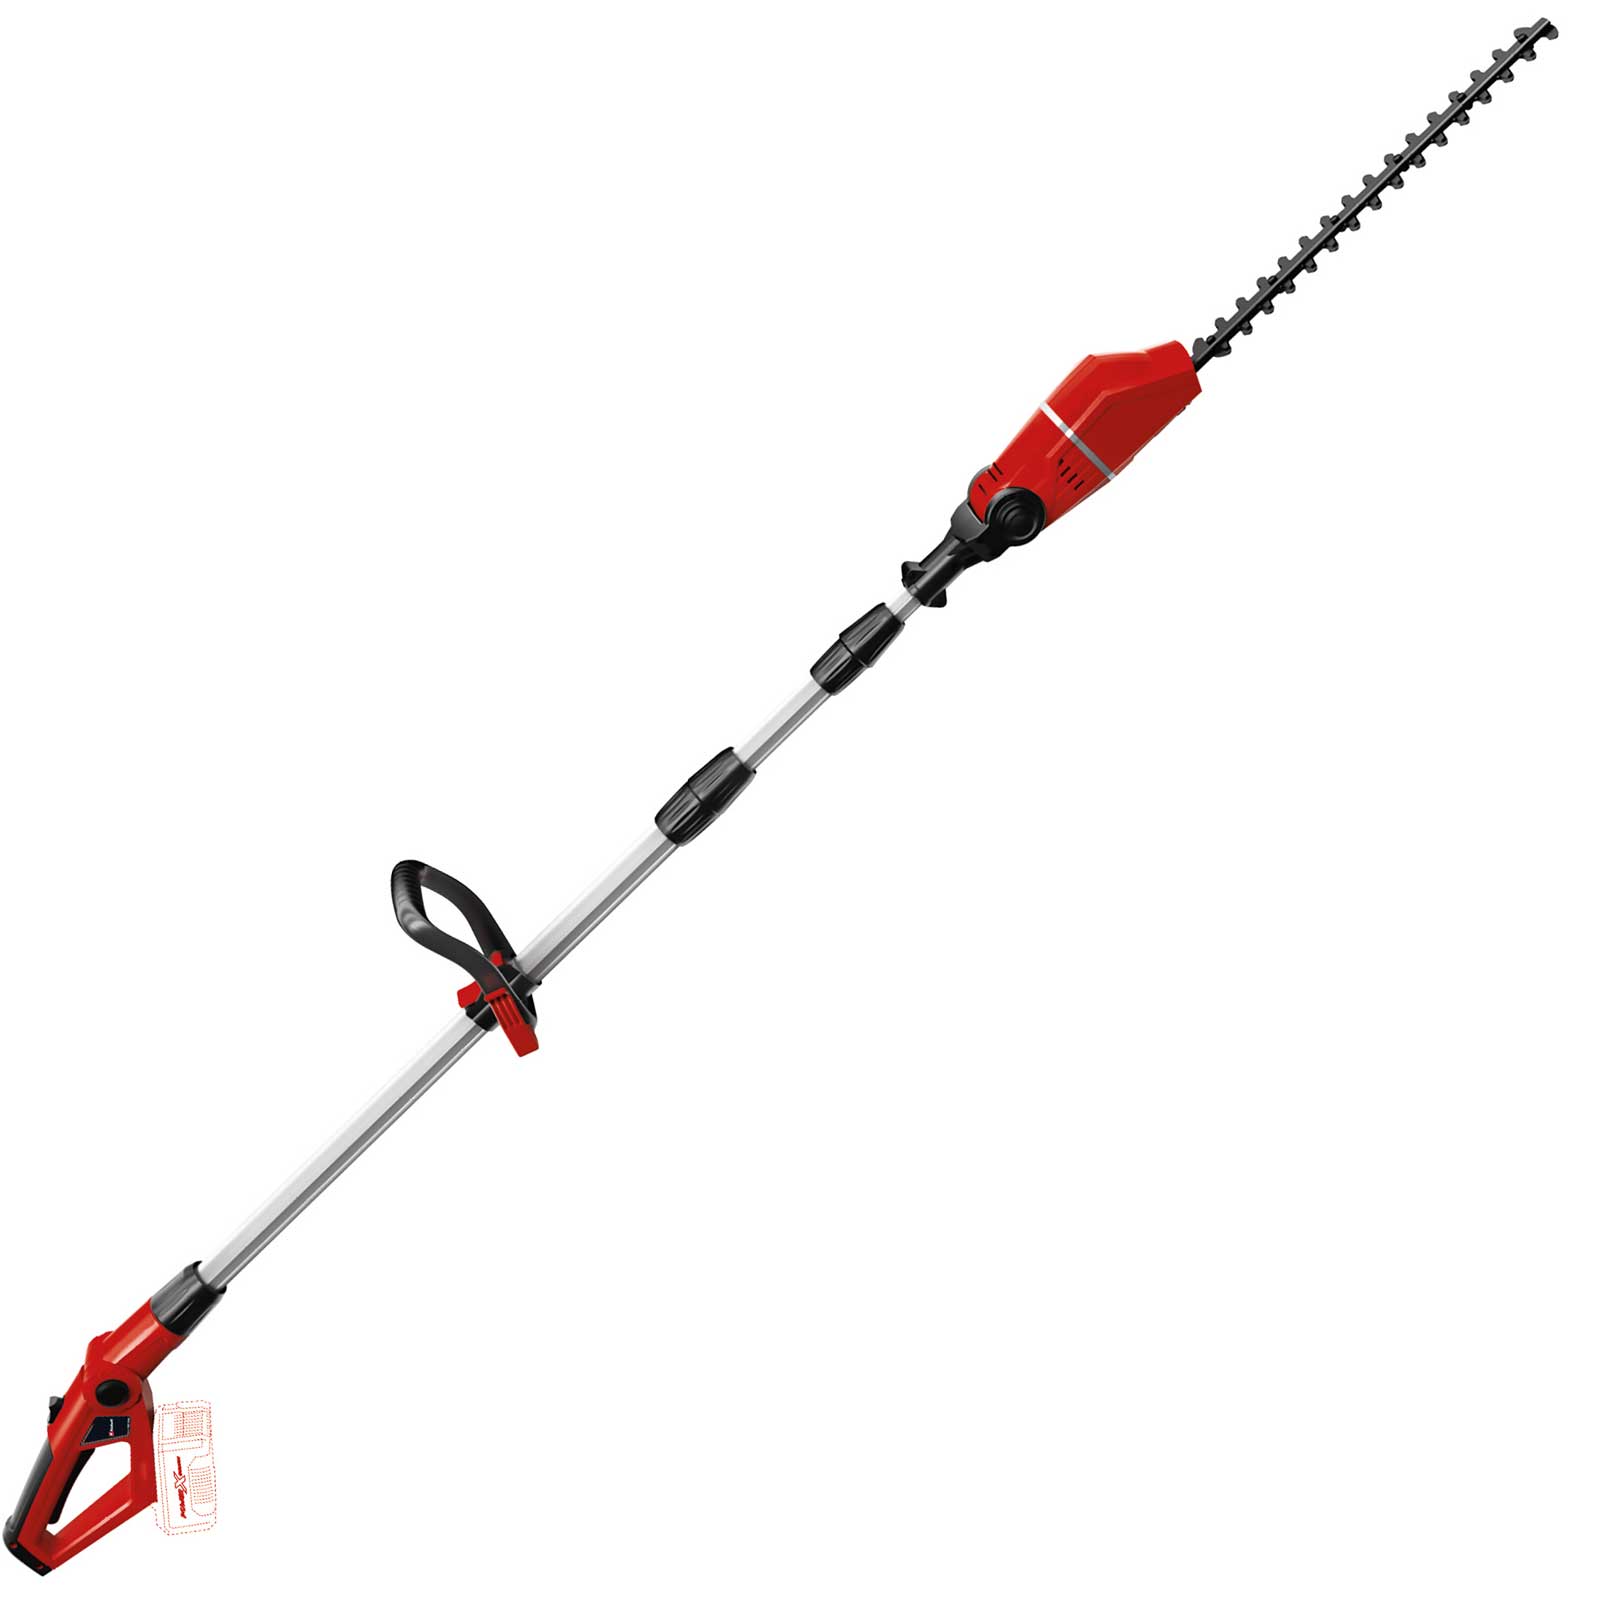 Image of Einhell GE-HH 18/45 Li T 18v Cordless High Reach Hedge Trimmer 450mm No Batteries No Charger